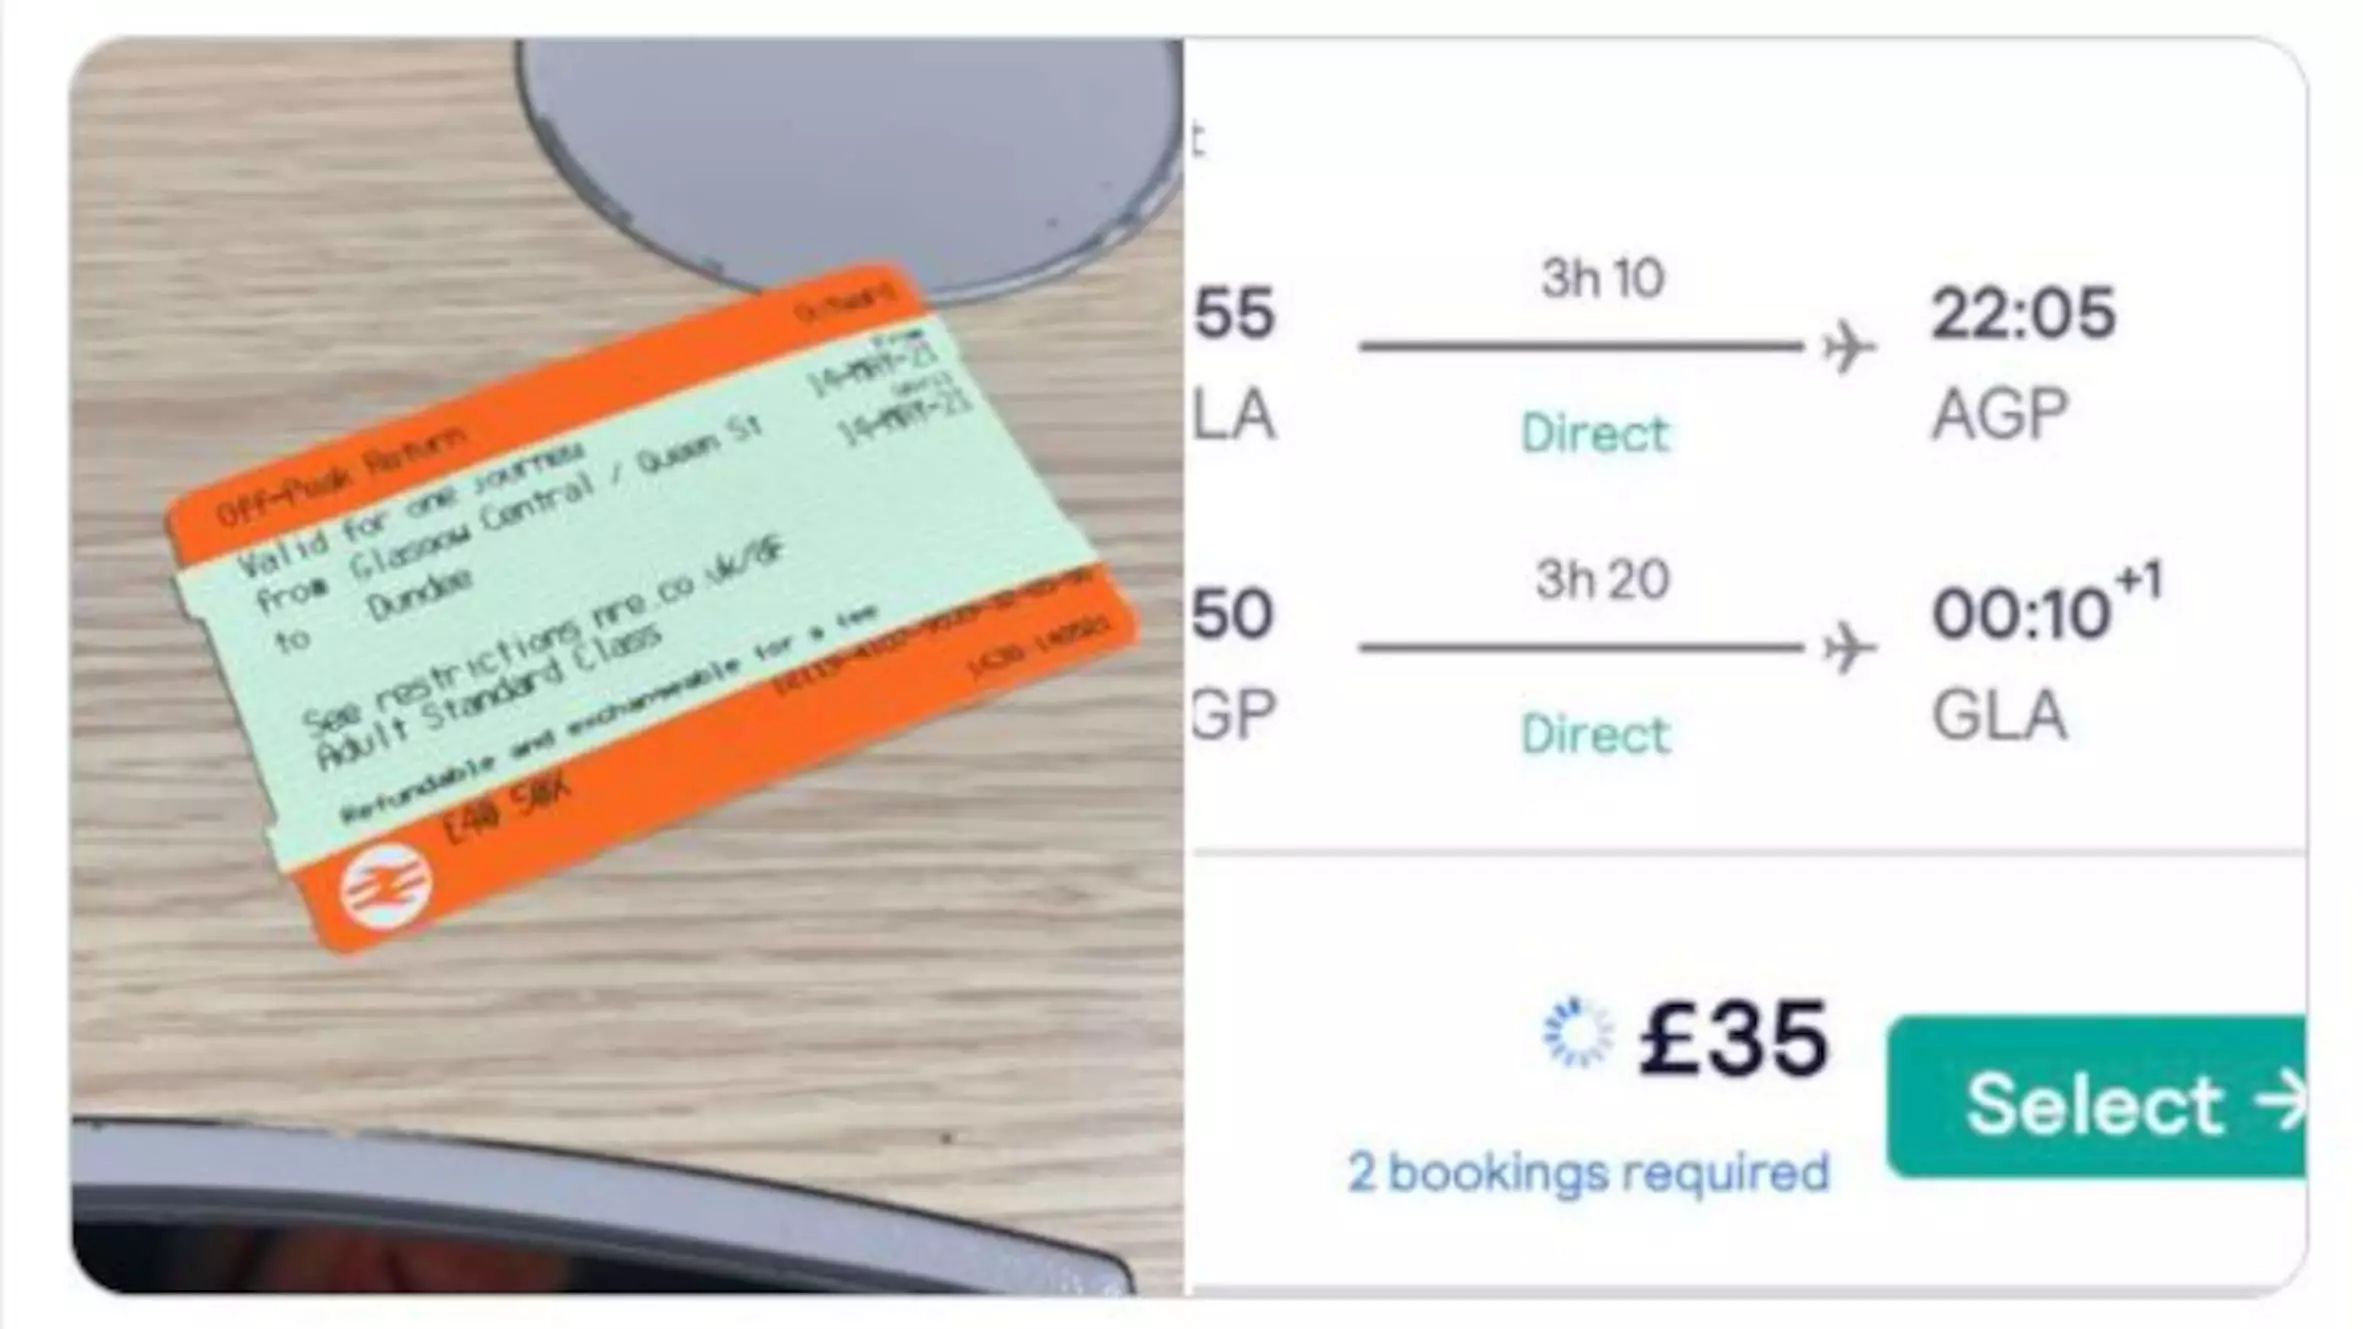 Traveller Finds Flight From Glasgow To Malaga Cheaper Than Train To Dundee